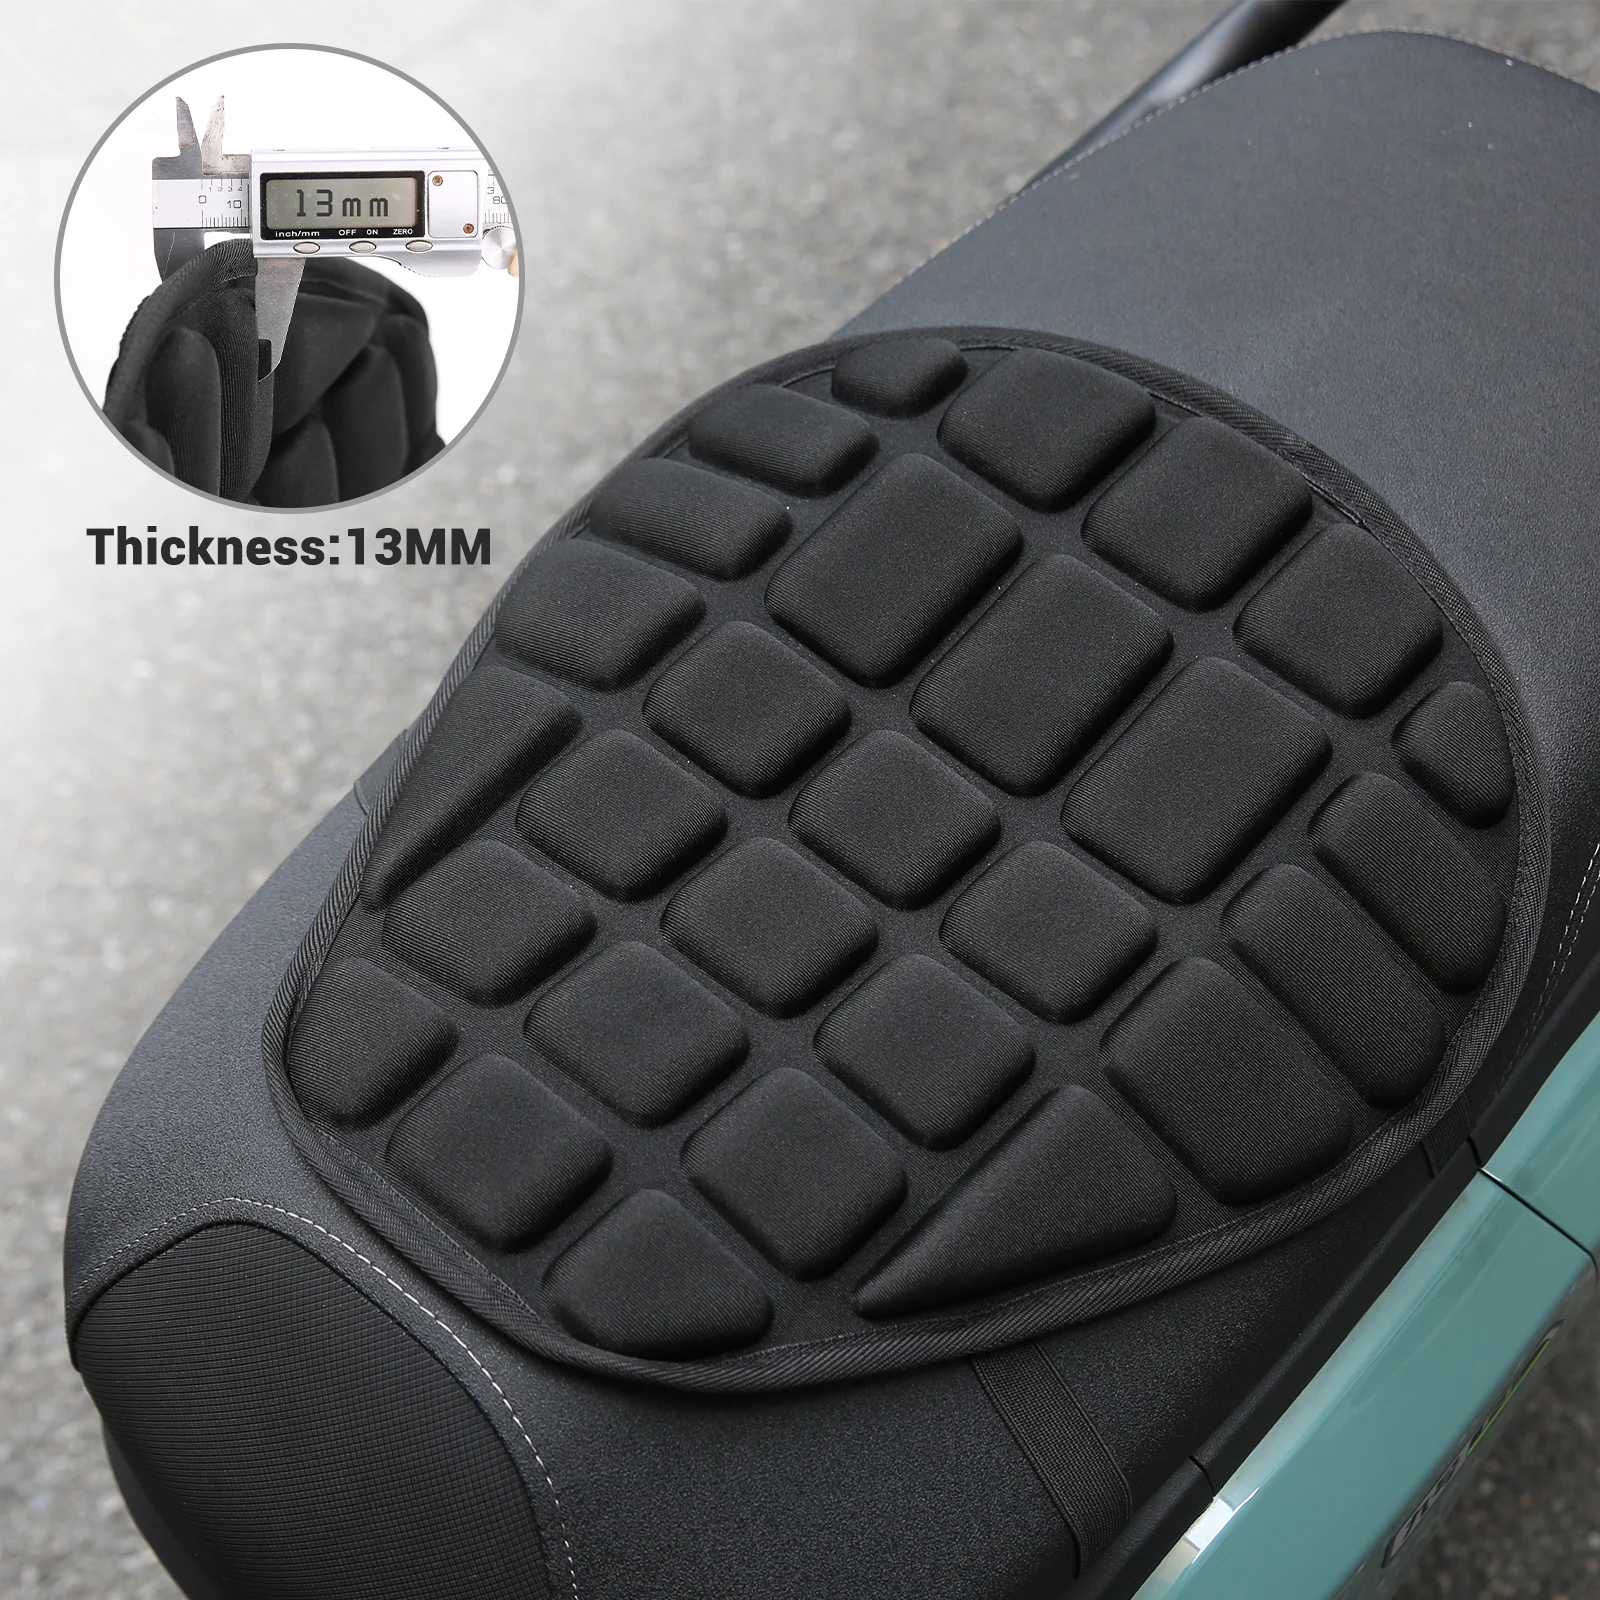 Universal Motorcycle Seat Cushion Cover Motorcycle Foam Soft Comfortable Cushion Pressure Ride Seat Pad Electric Bike Accessorie